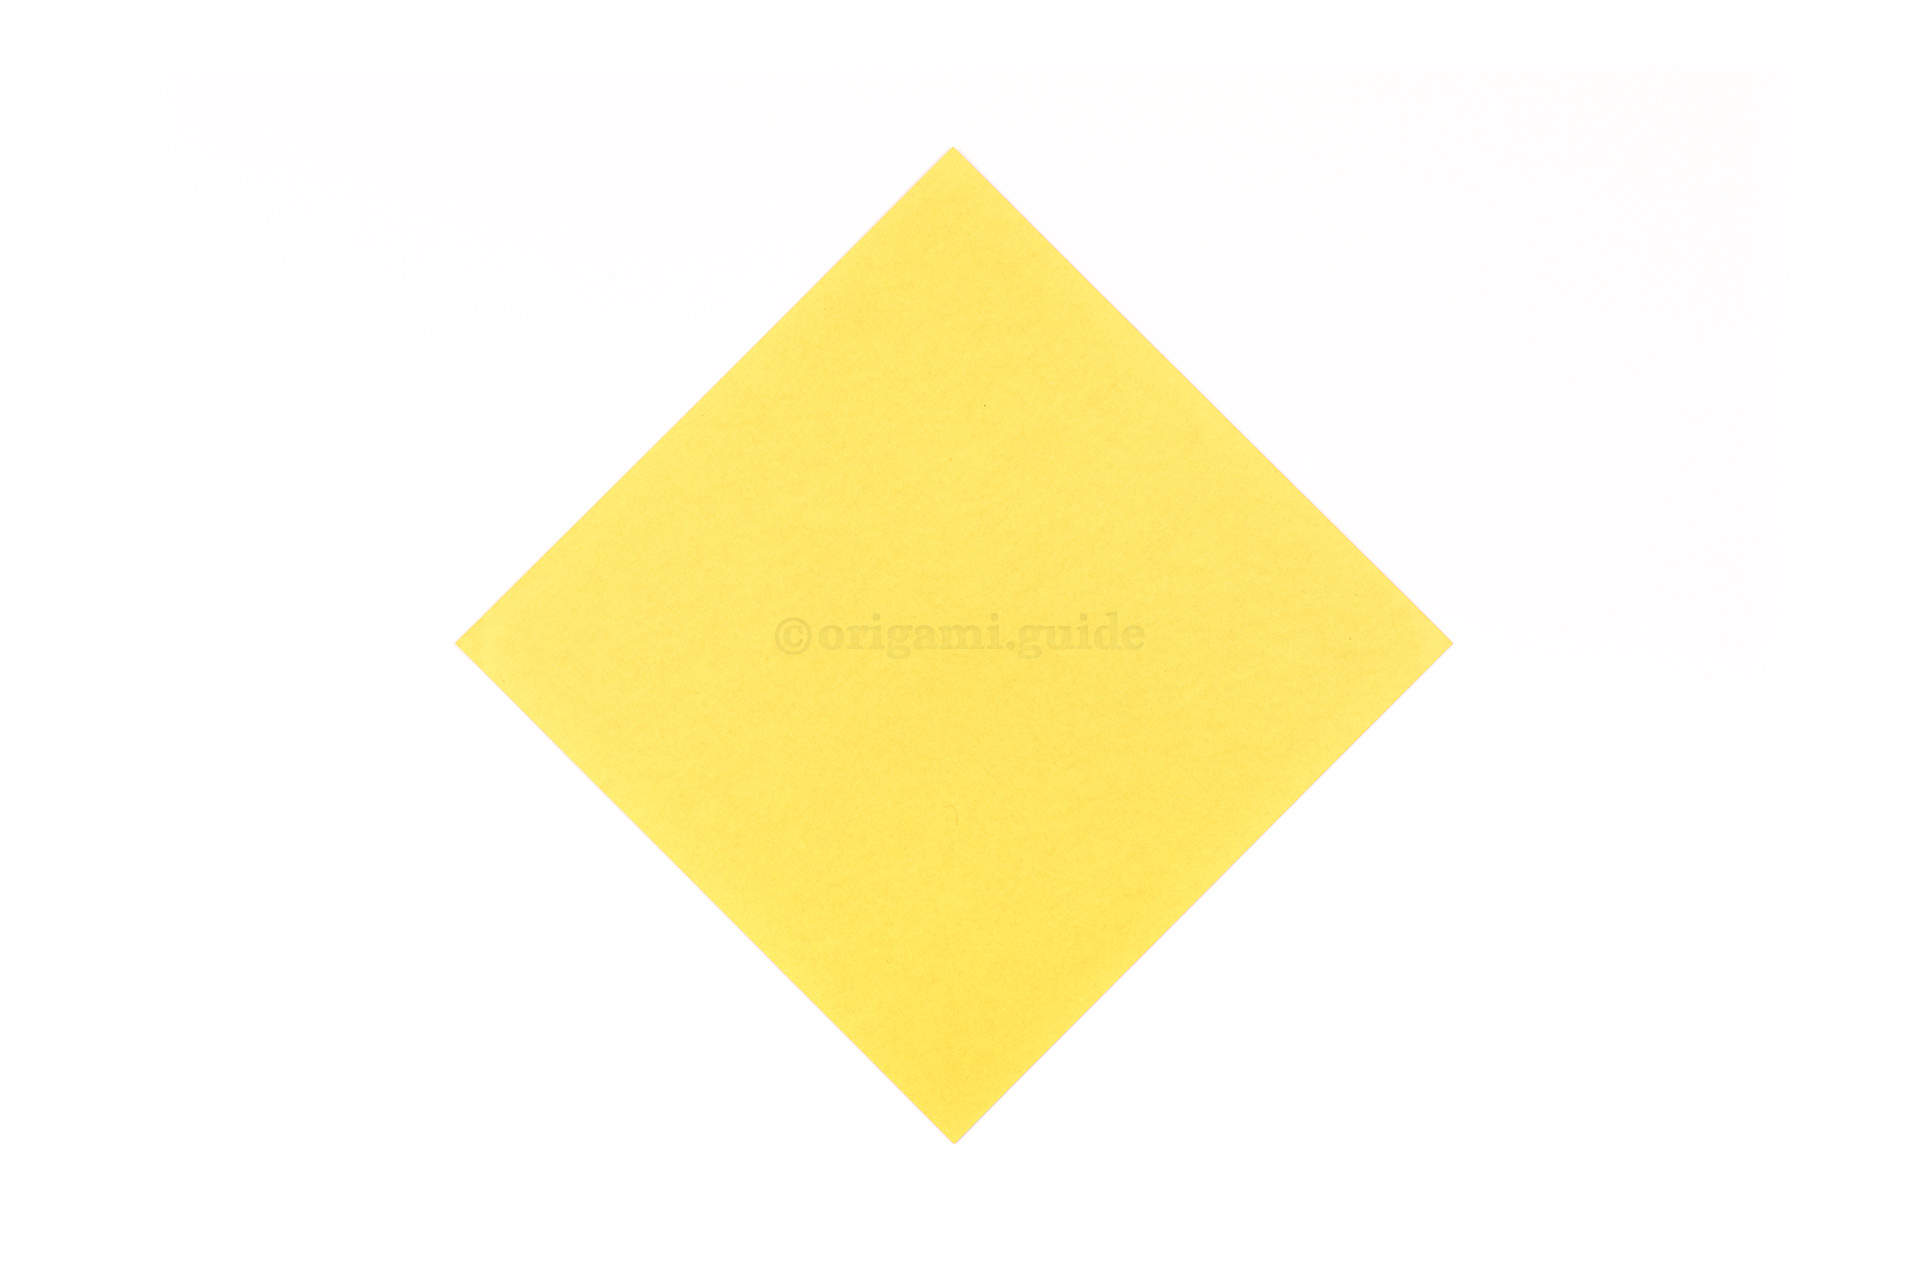 Now we will make the origami chick to go inside the egg. This is the front of our origami paper, the chick will end up being this colour.